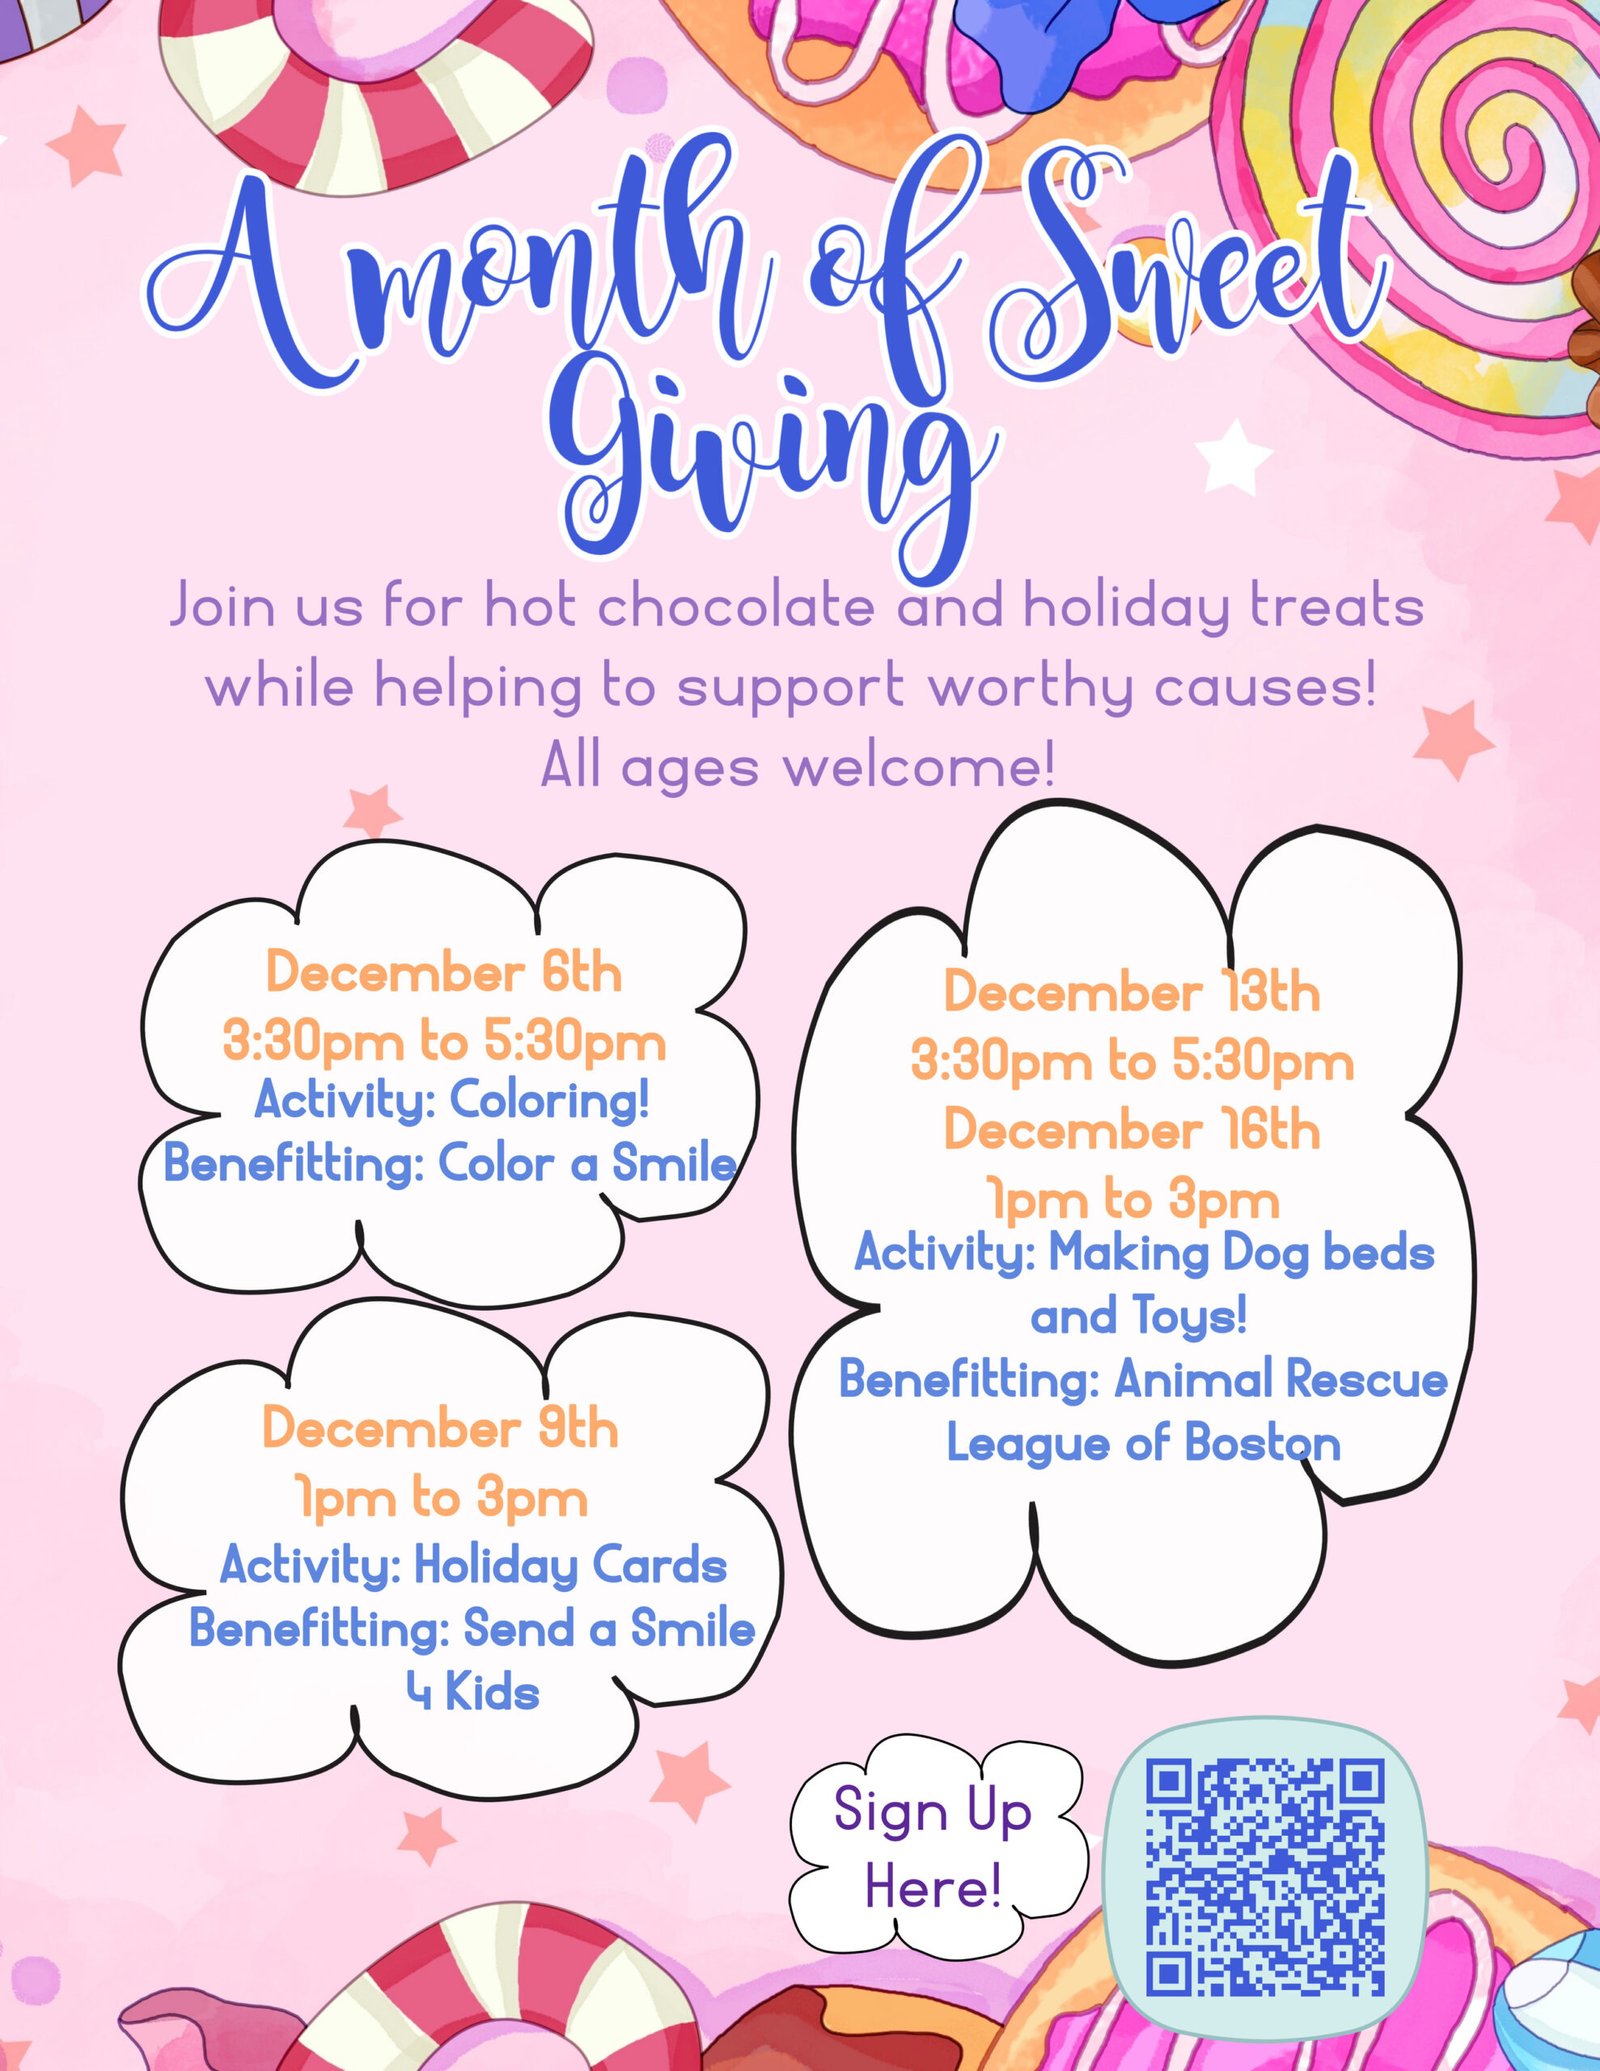 A flyer describing the month of sweet giving.